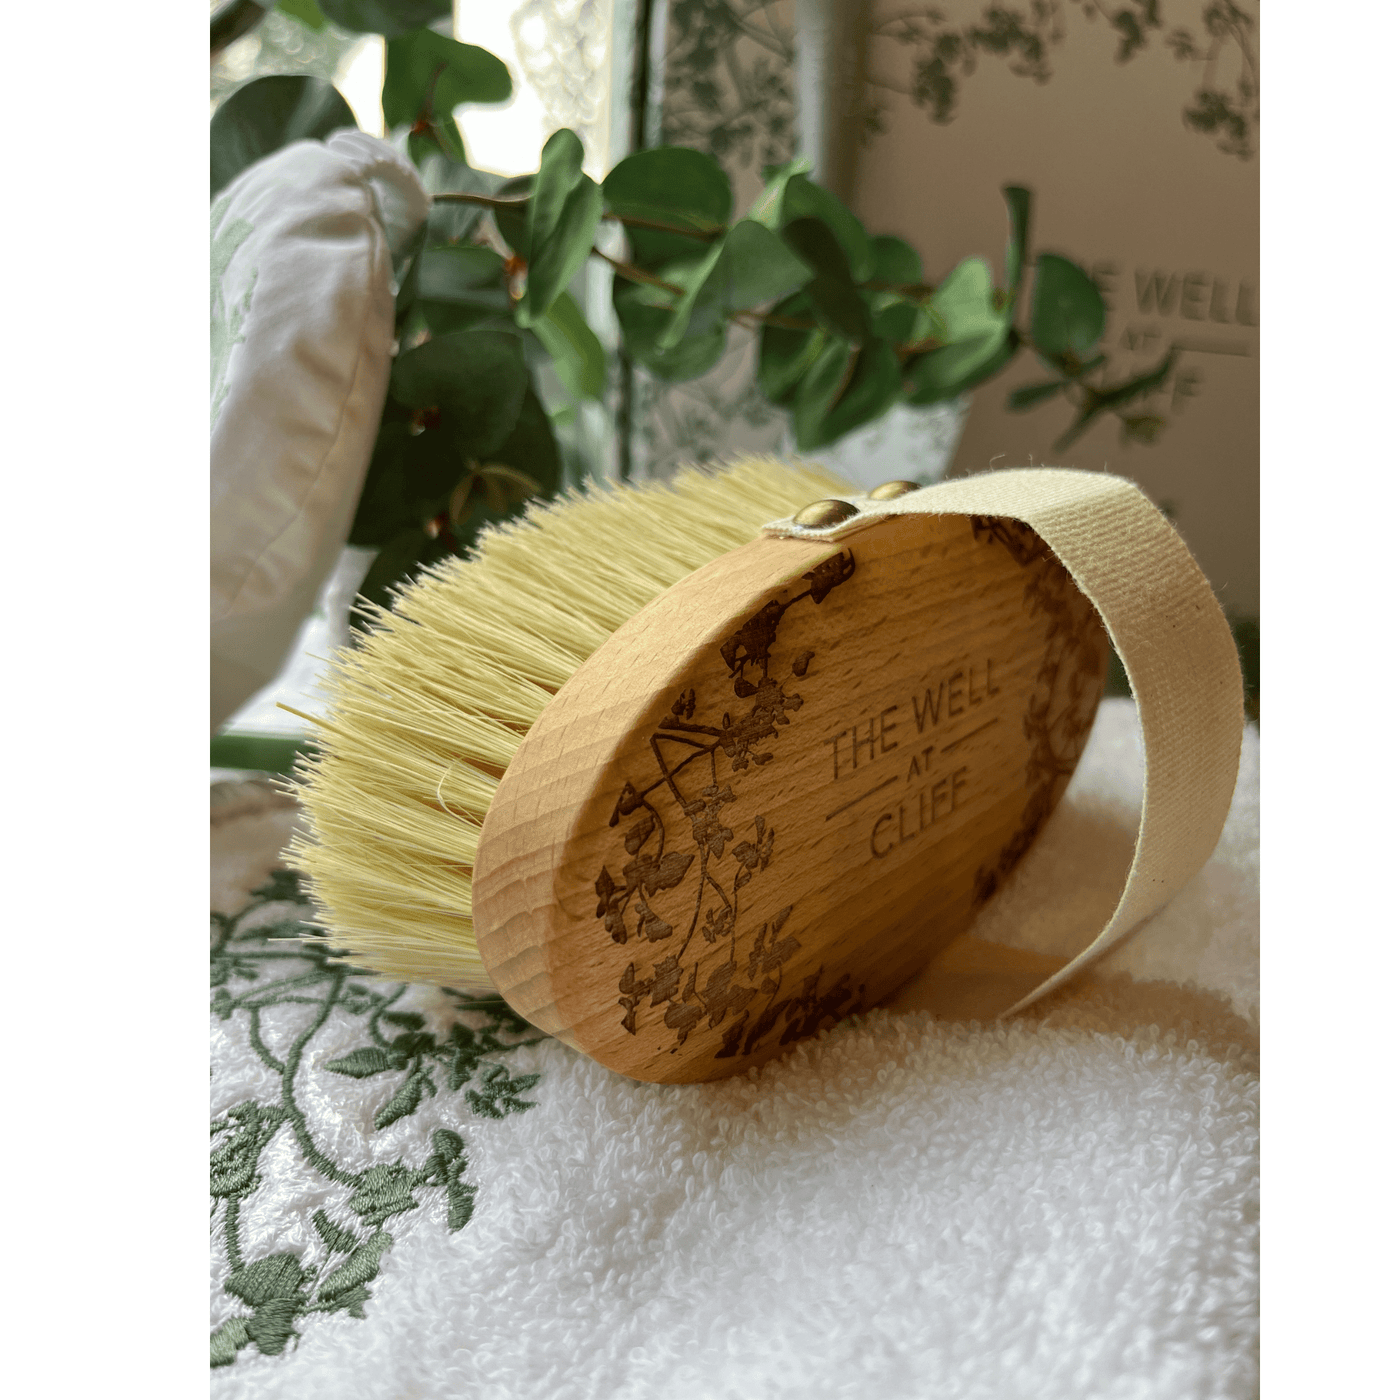 The Well at Cliff Robe Dry brushing